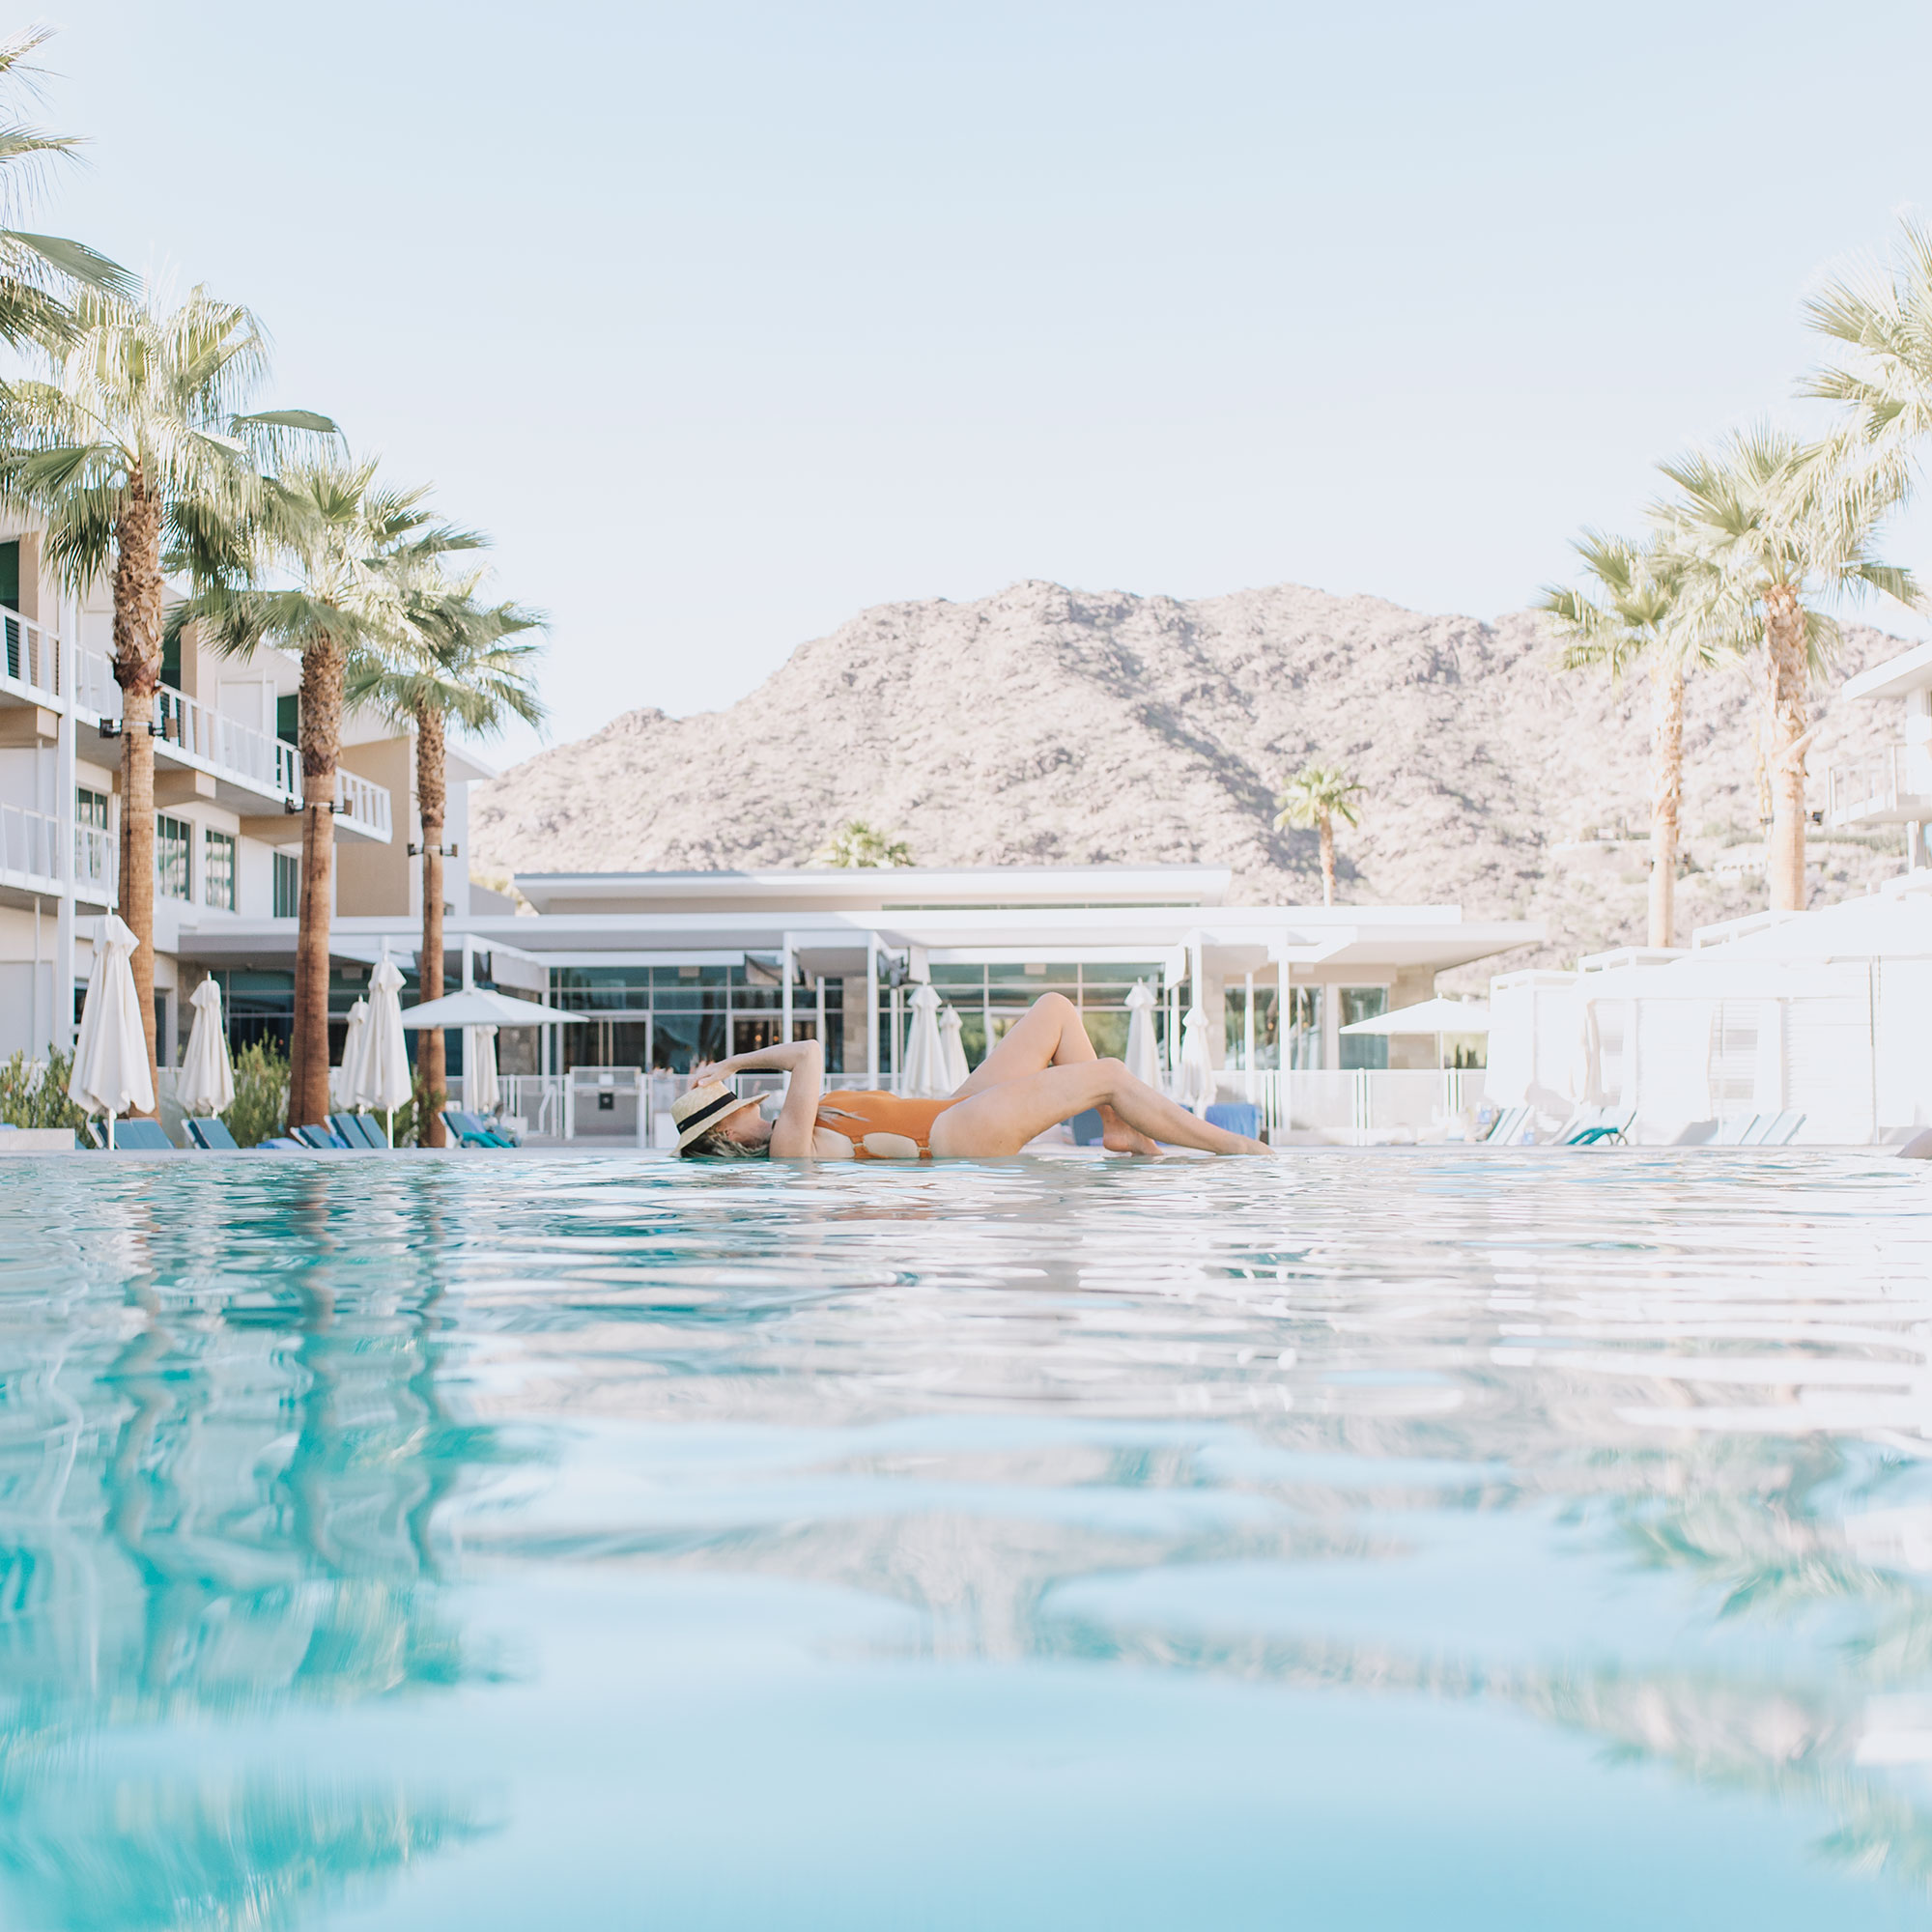 the most dreamy mid-century pool during our desert resort giveaway | thelovedesignedlife.com #mountainshadows #getaway